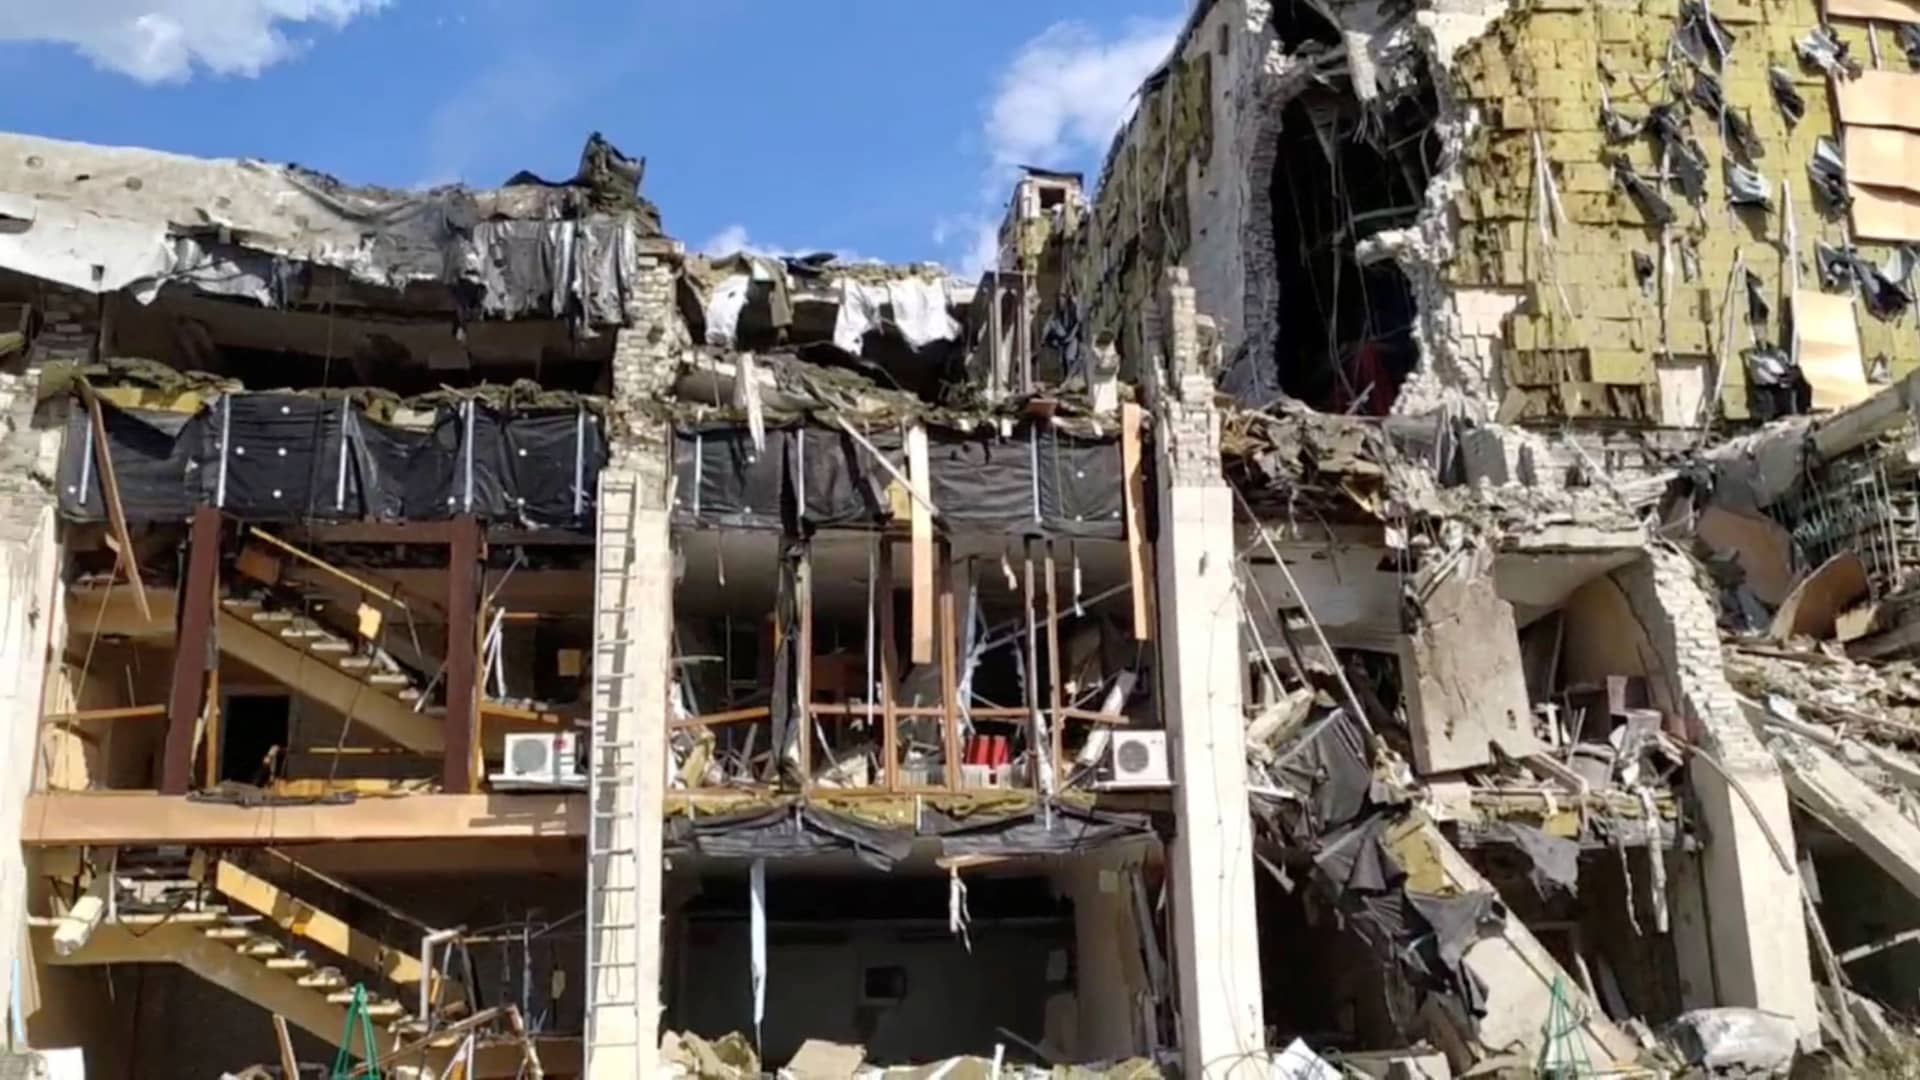 A still image shows a destroyed building after an airstrike on the Cultural Centre, as Russia's attack on Ukraine continues, in Lozova, Kharkiv region, Ukraine in this screen grab taken from a handout video released May 20, 2022.